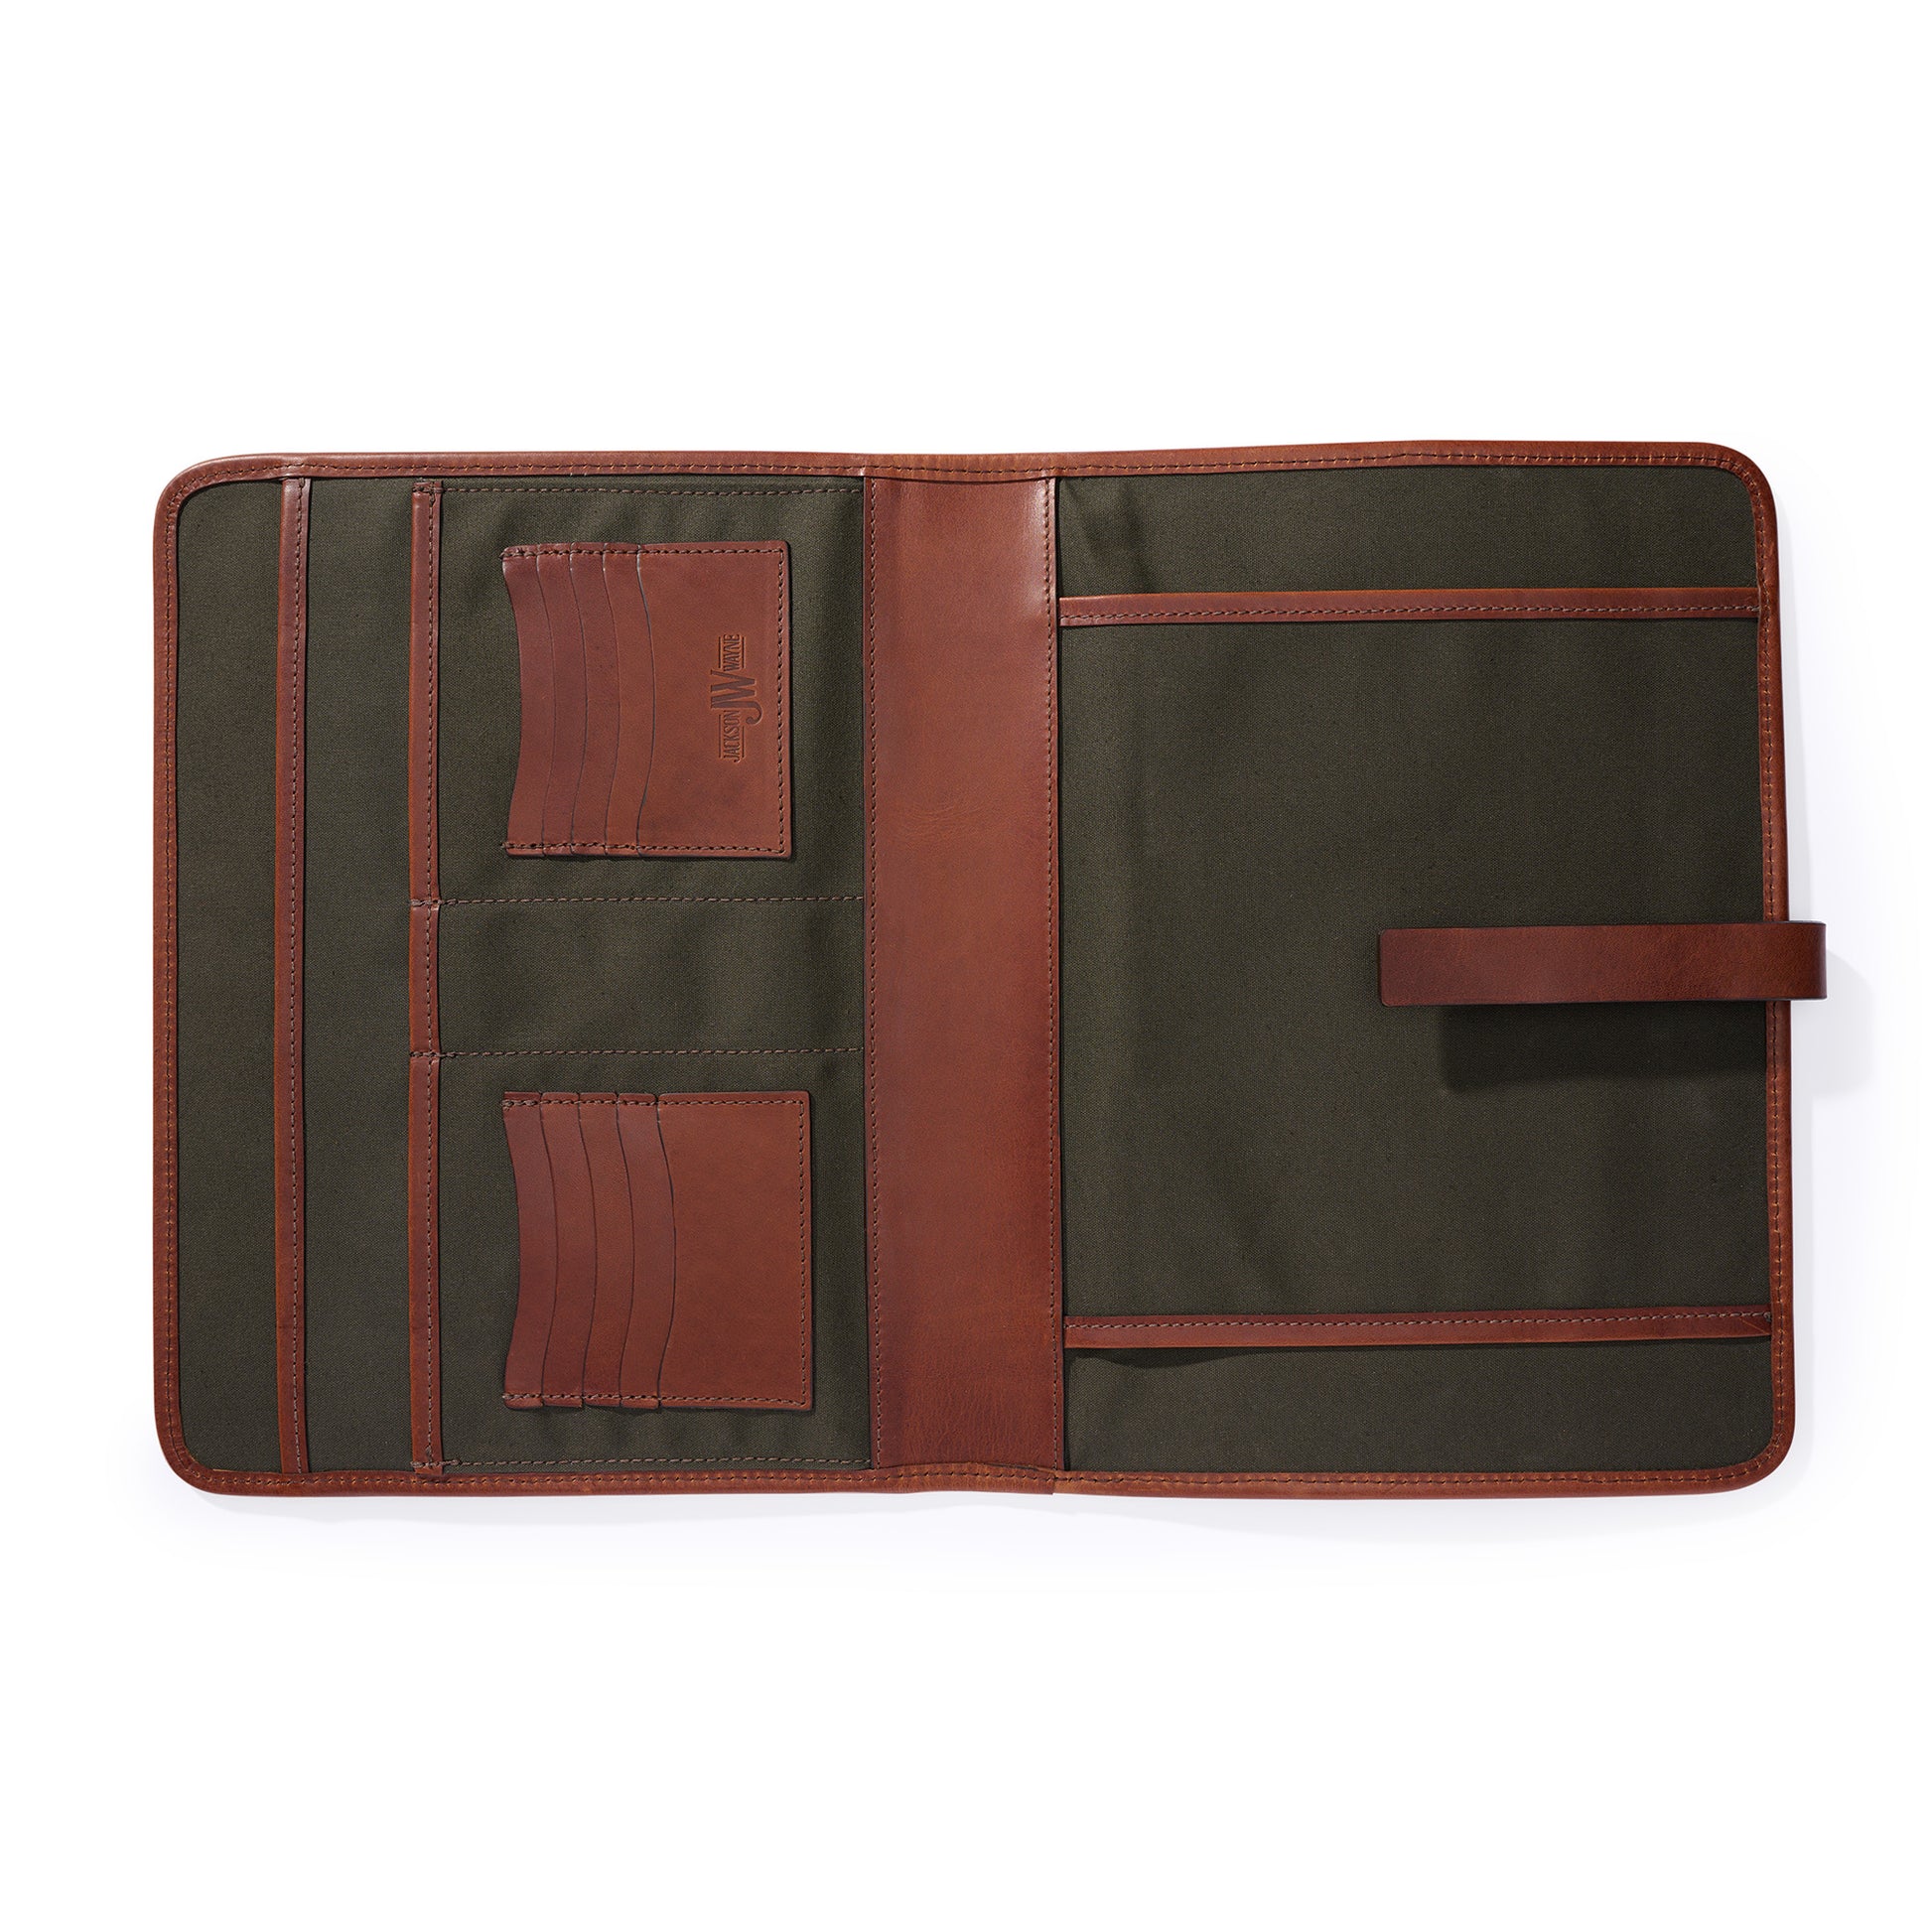 inside full grain leather portfolio ambidextrous orientation for right or left handed - vintage brown leather